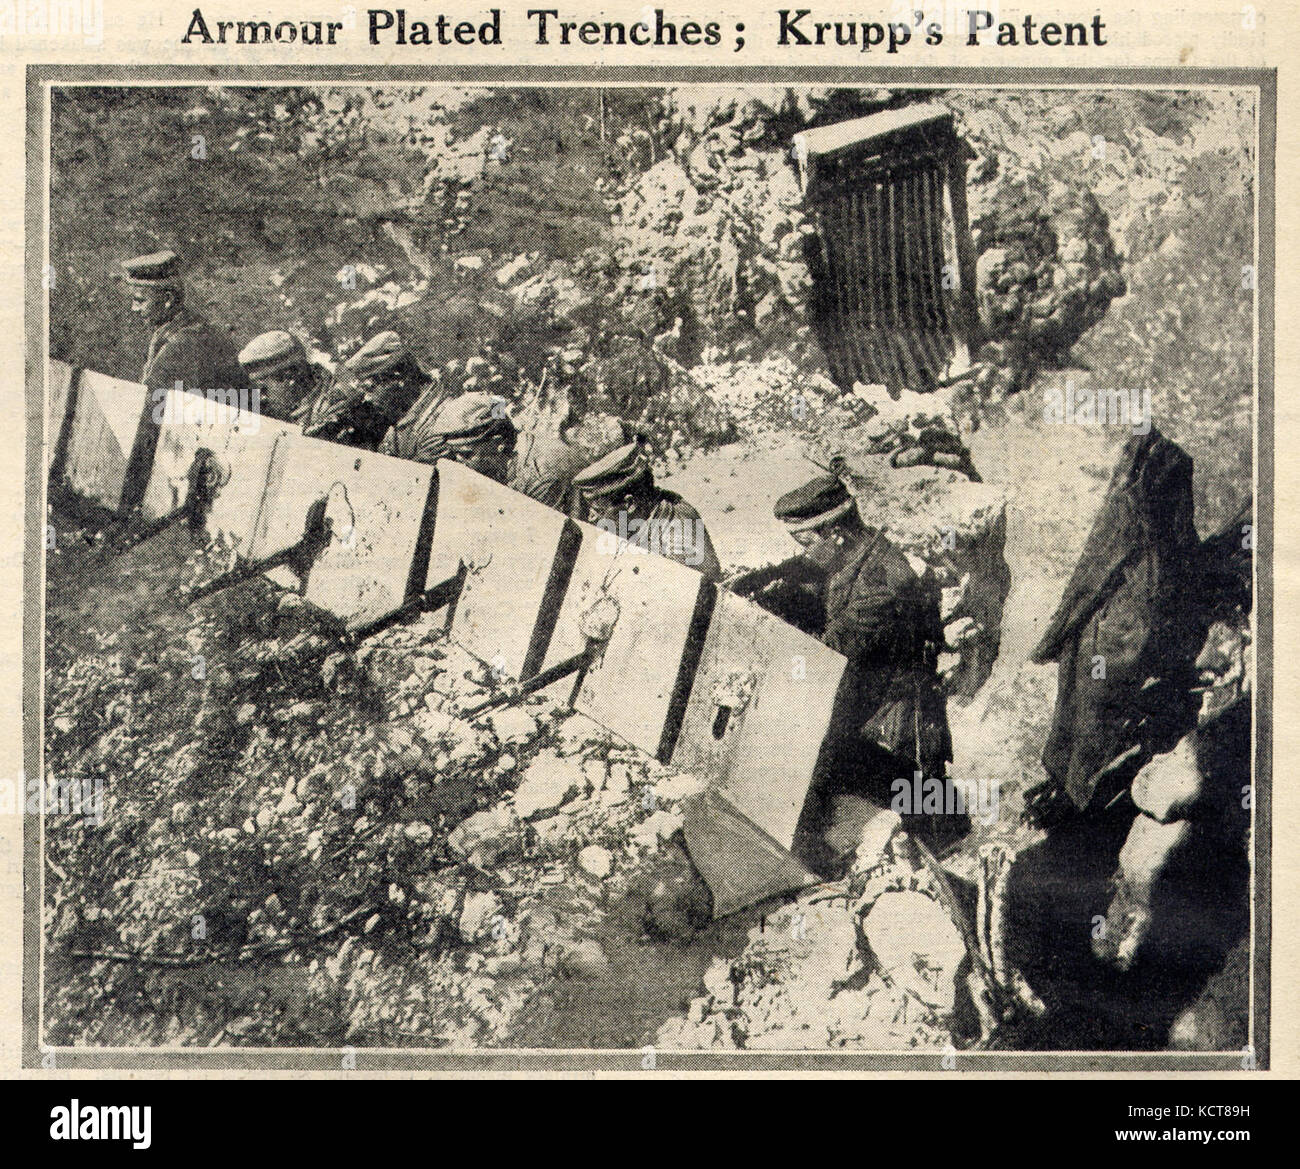 Armour Plated Trenches 1915 Stock Photo